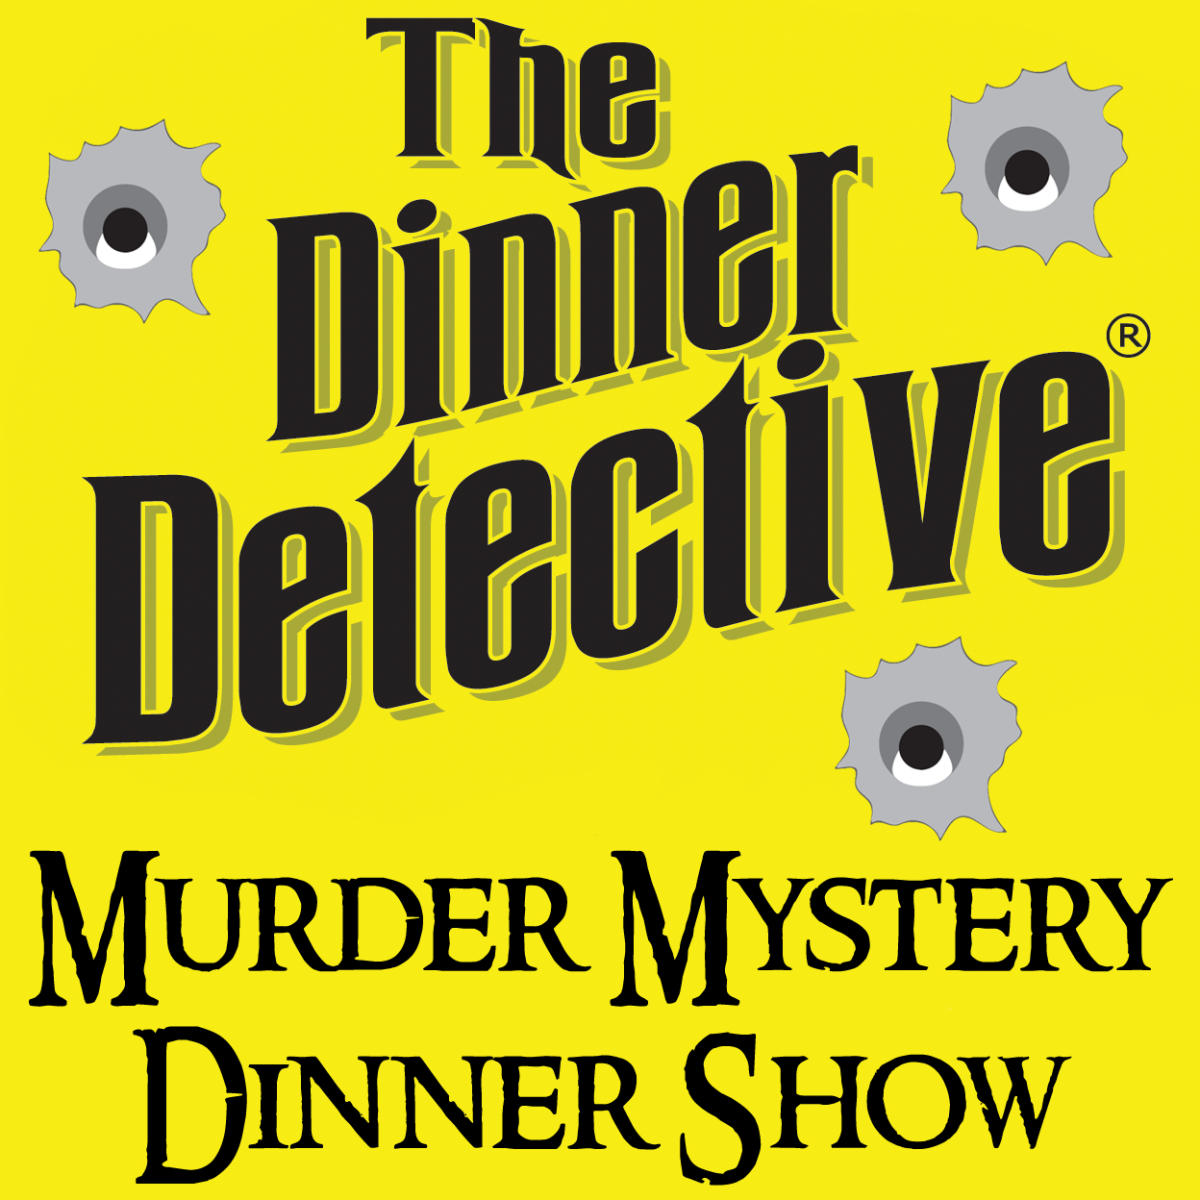 The Dinner Detective Comedy Murder Mystery Diner Show